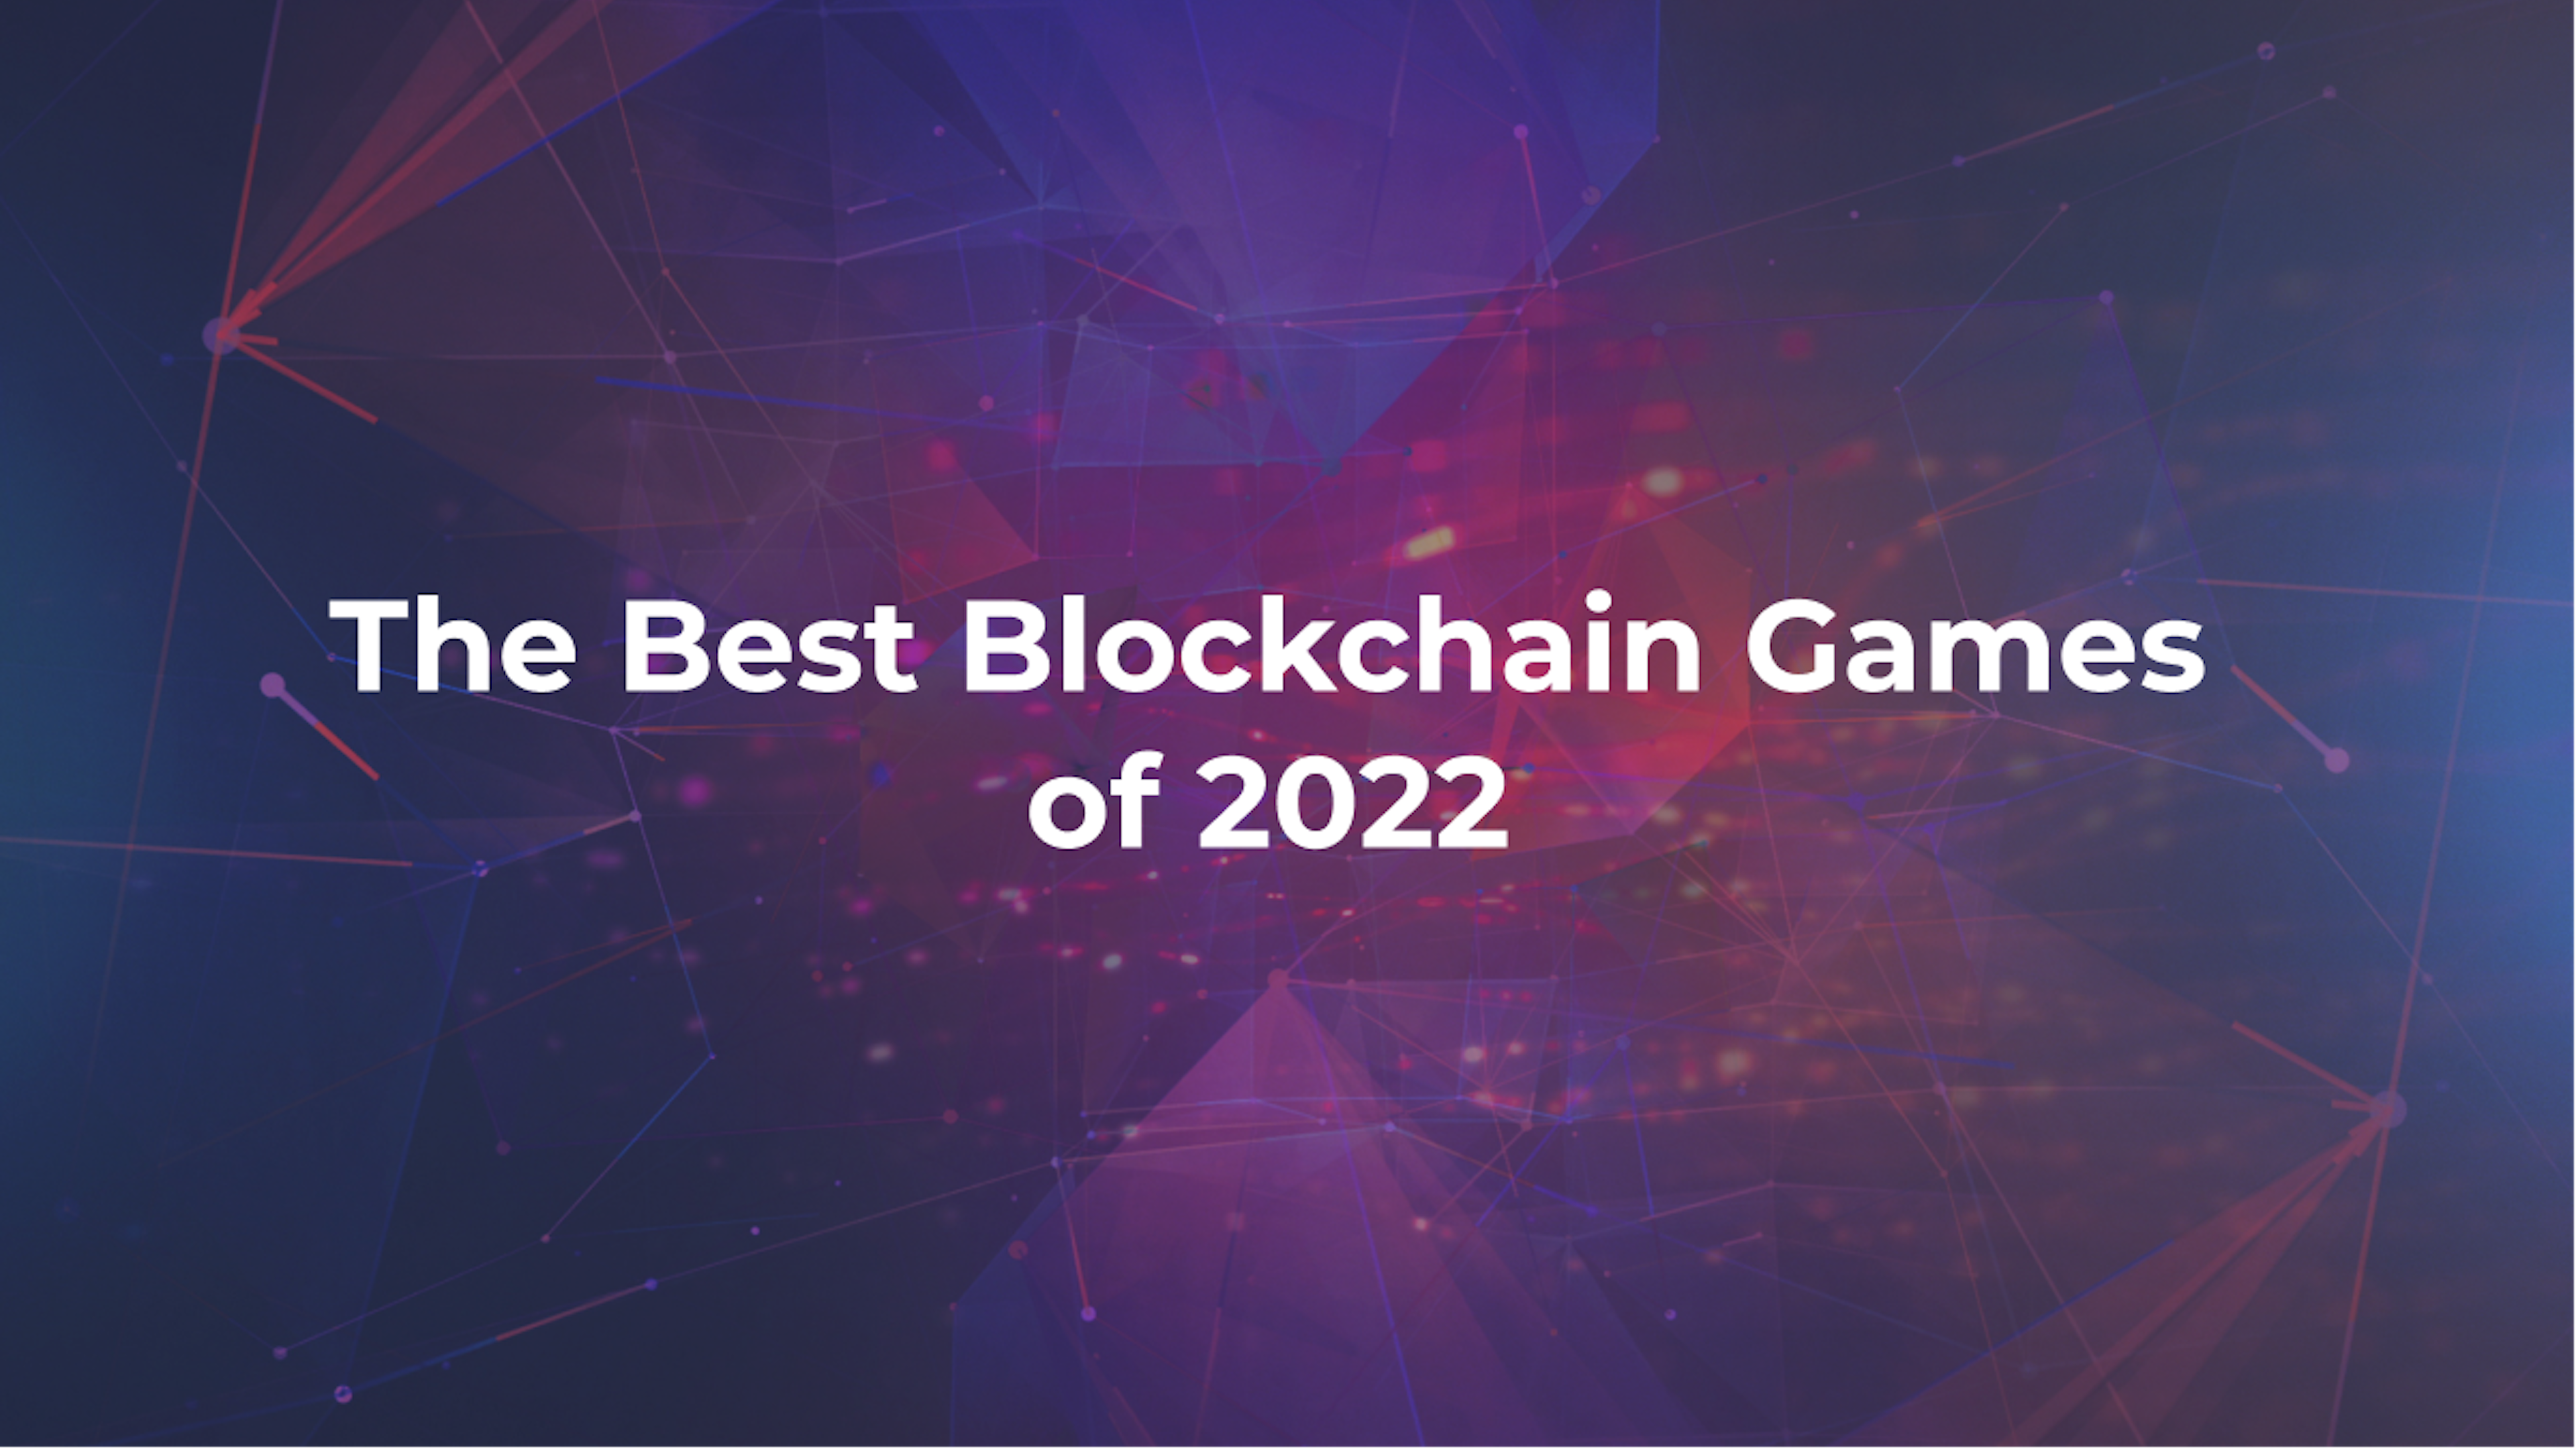 Here Are The Best Blockchain Games of 2022 | Blockchain Works